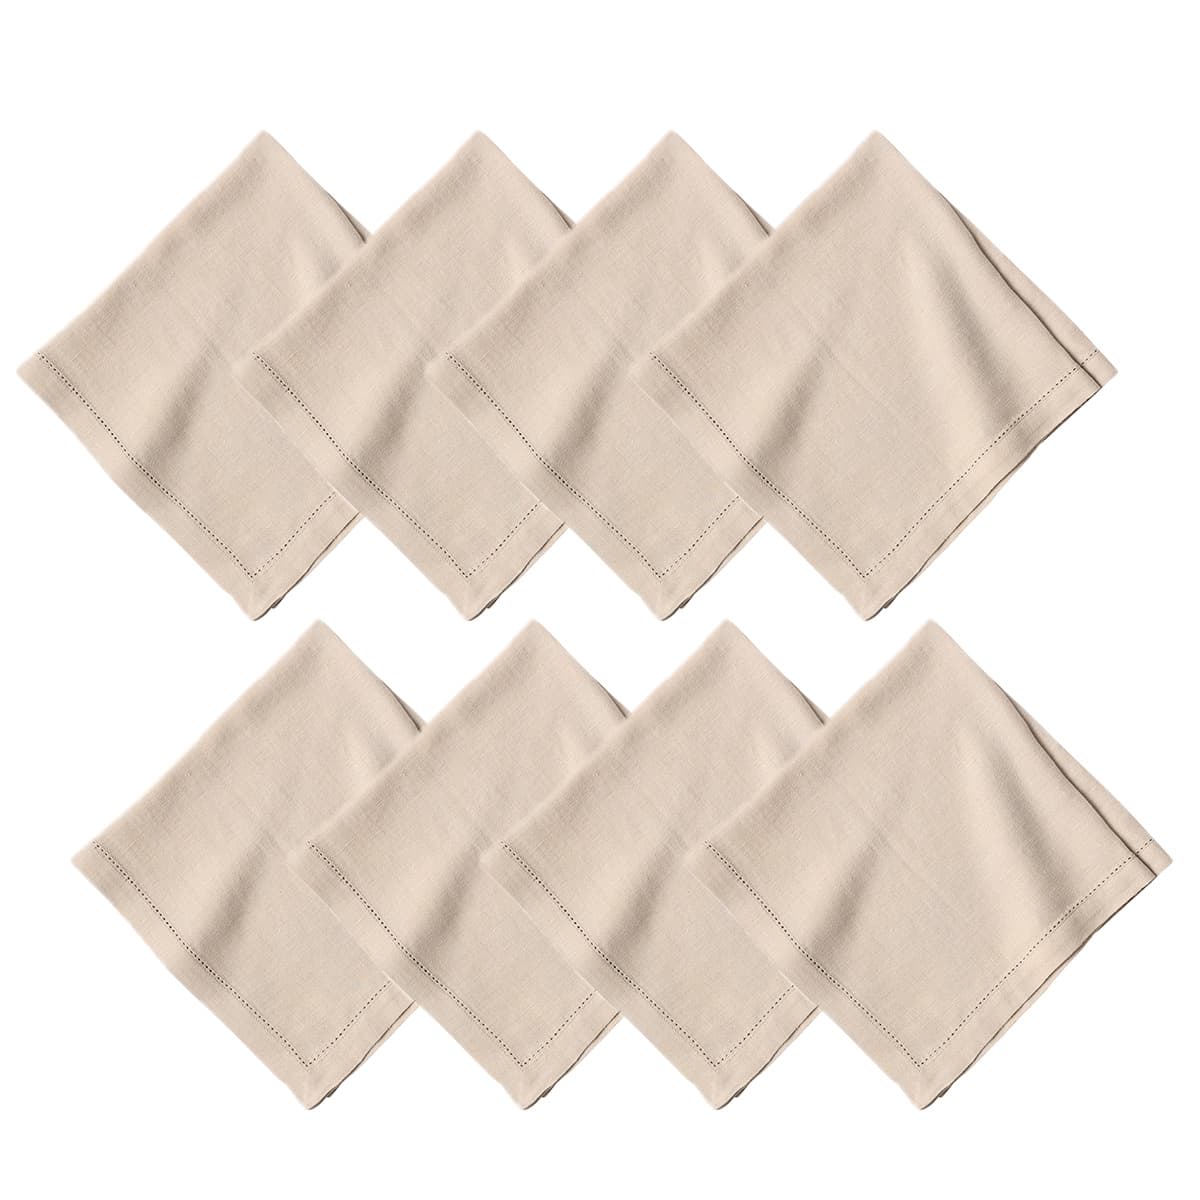 Our specially crafted fabric is gently washed for a soft hand that just gets better over time, reminiscent of an heirloom linen. Our napkin features a subtle herringbone weave with a delicate hemstitch border. Thoughtfully designed to combine natural texture with classic pattern. Set of 8.